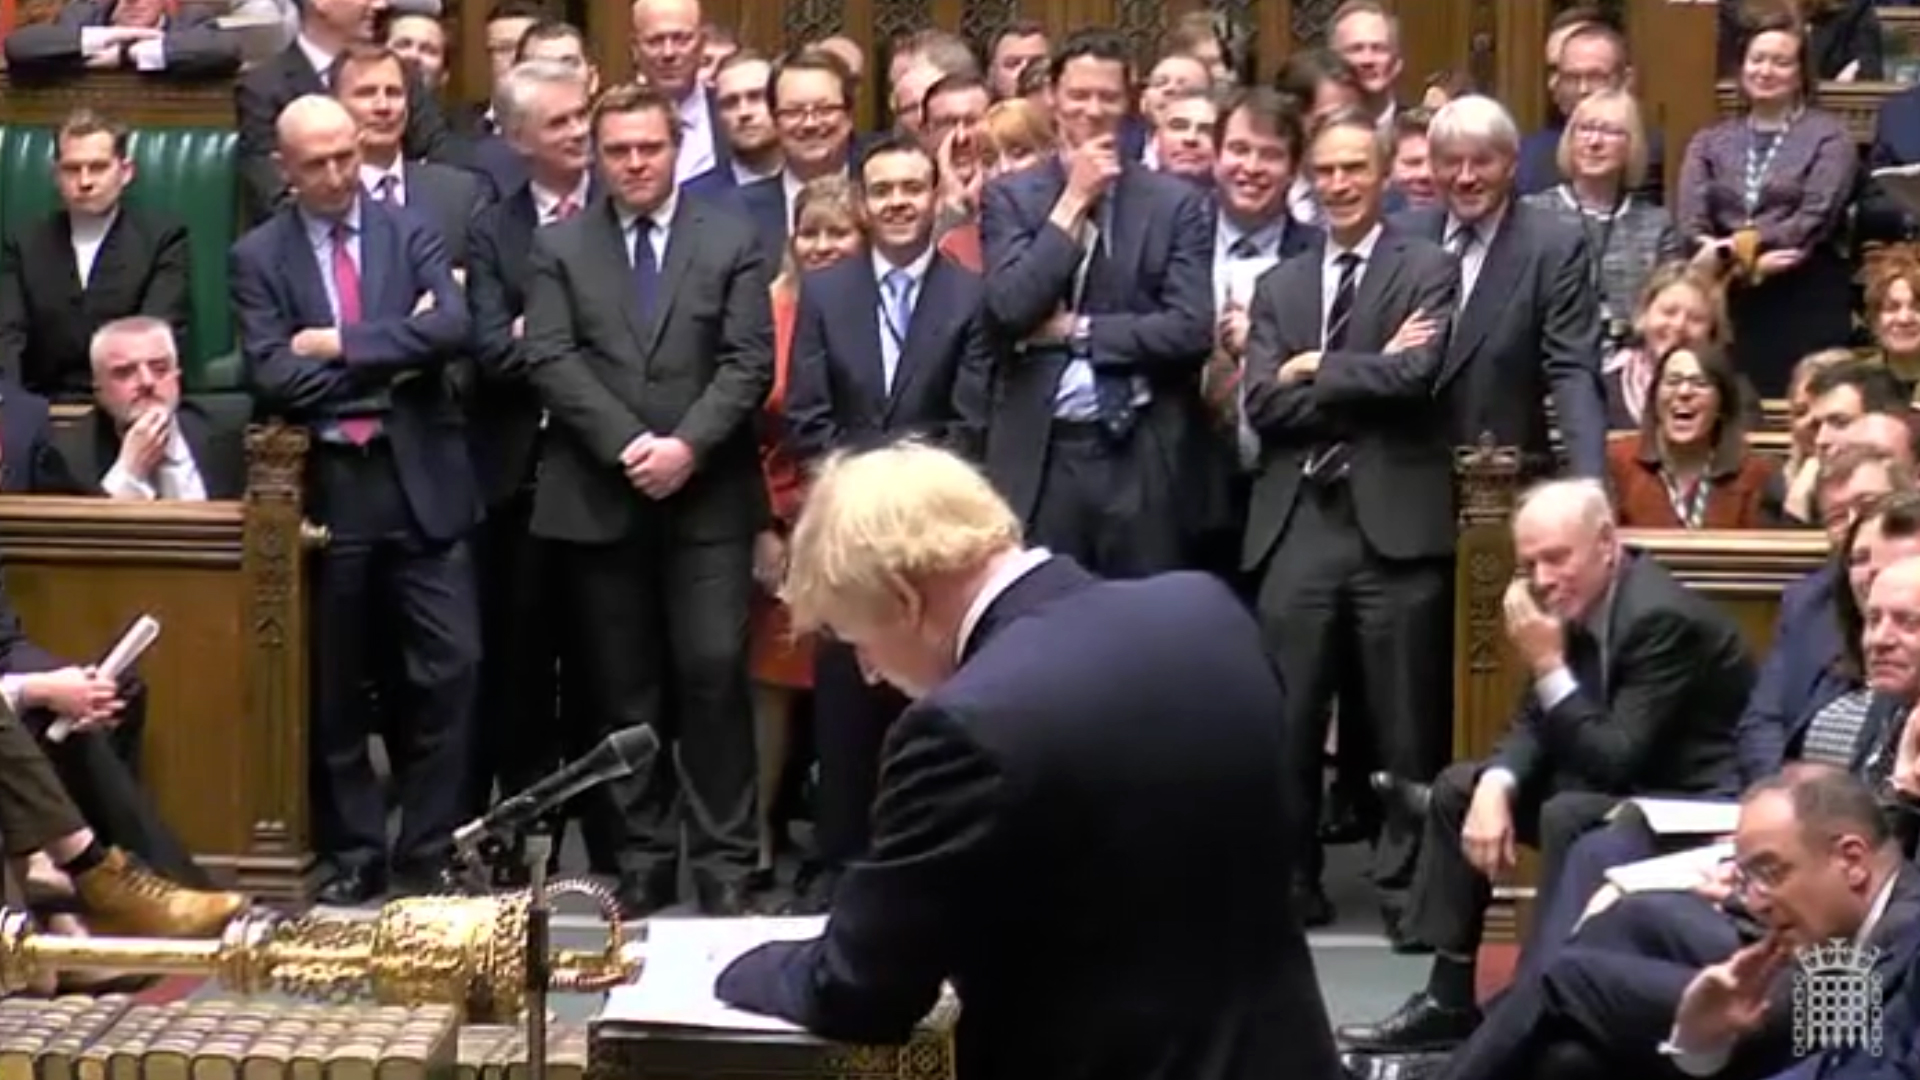 Boris Johnson standing at the despatch box in the House of Commons in front of a group of MPs